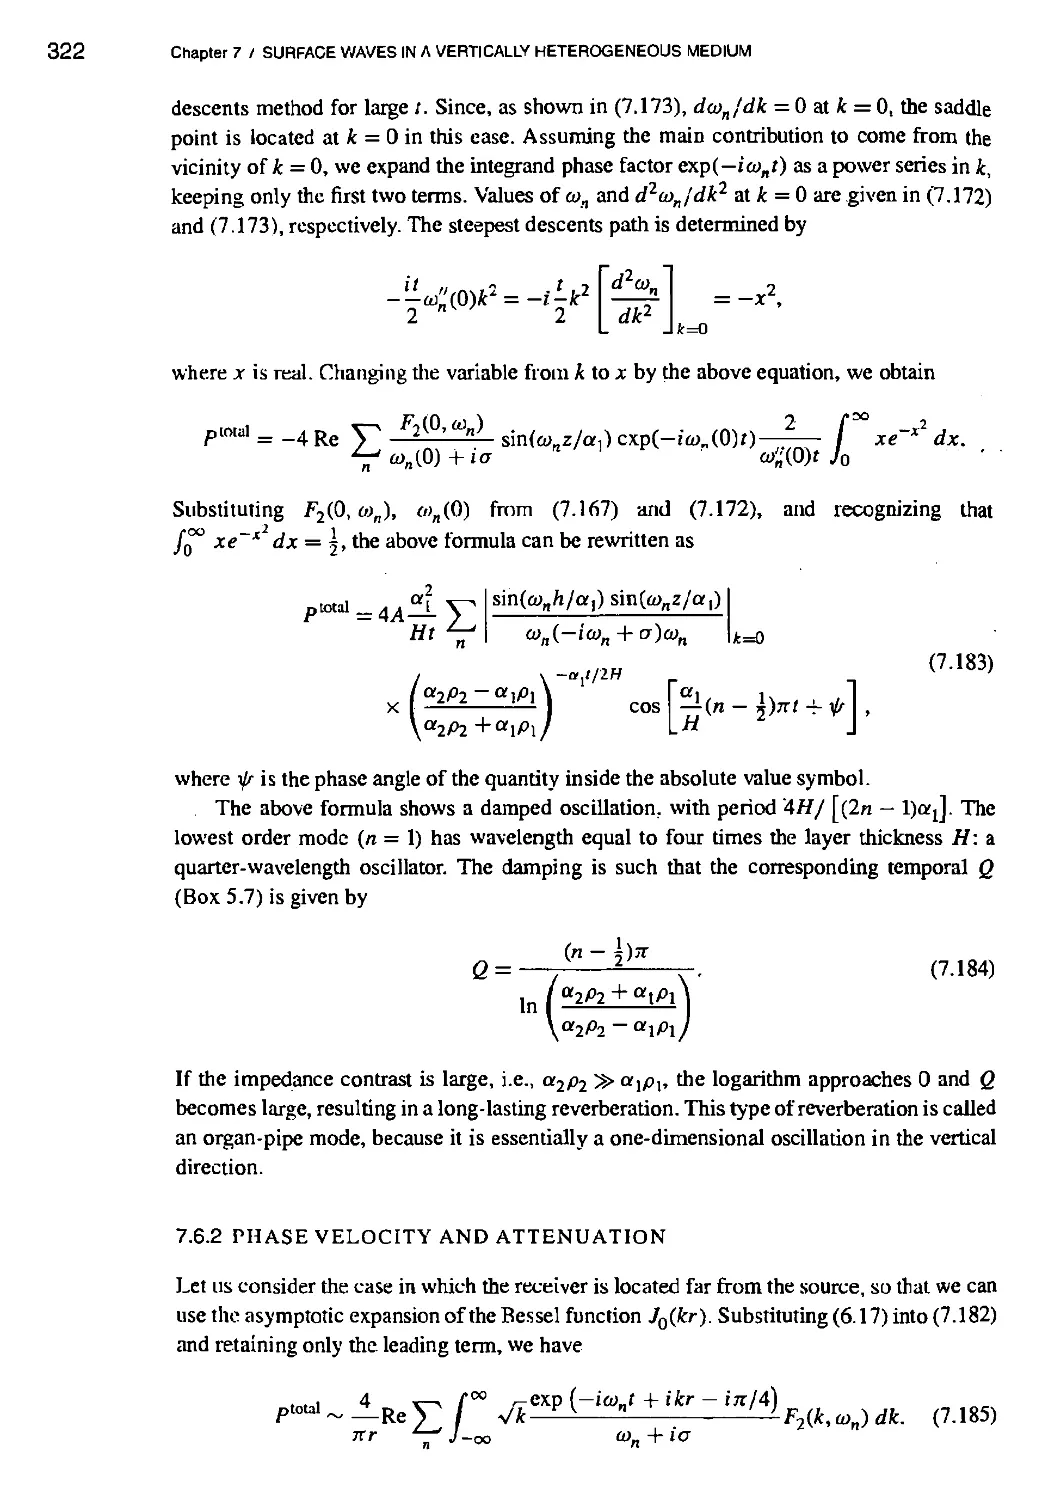 7.6.2 Phase velocity and attenuation